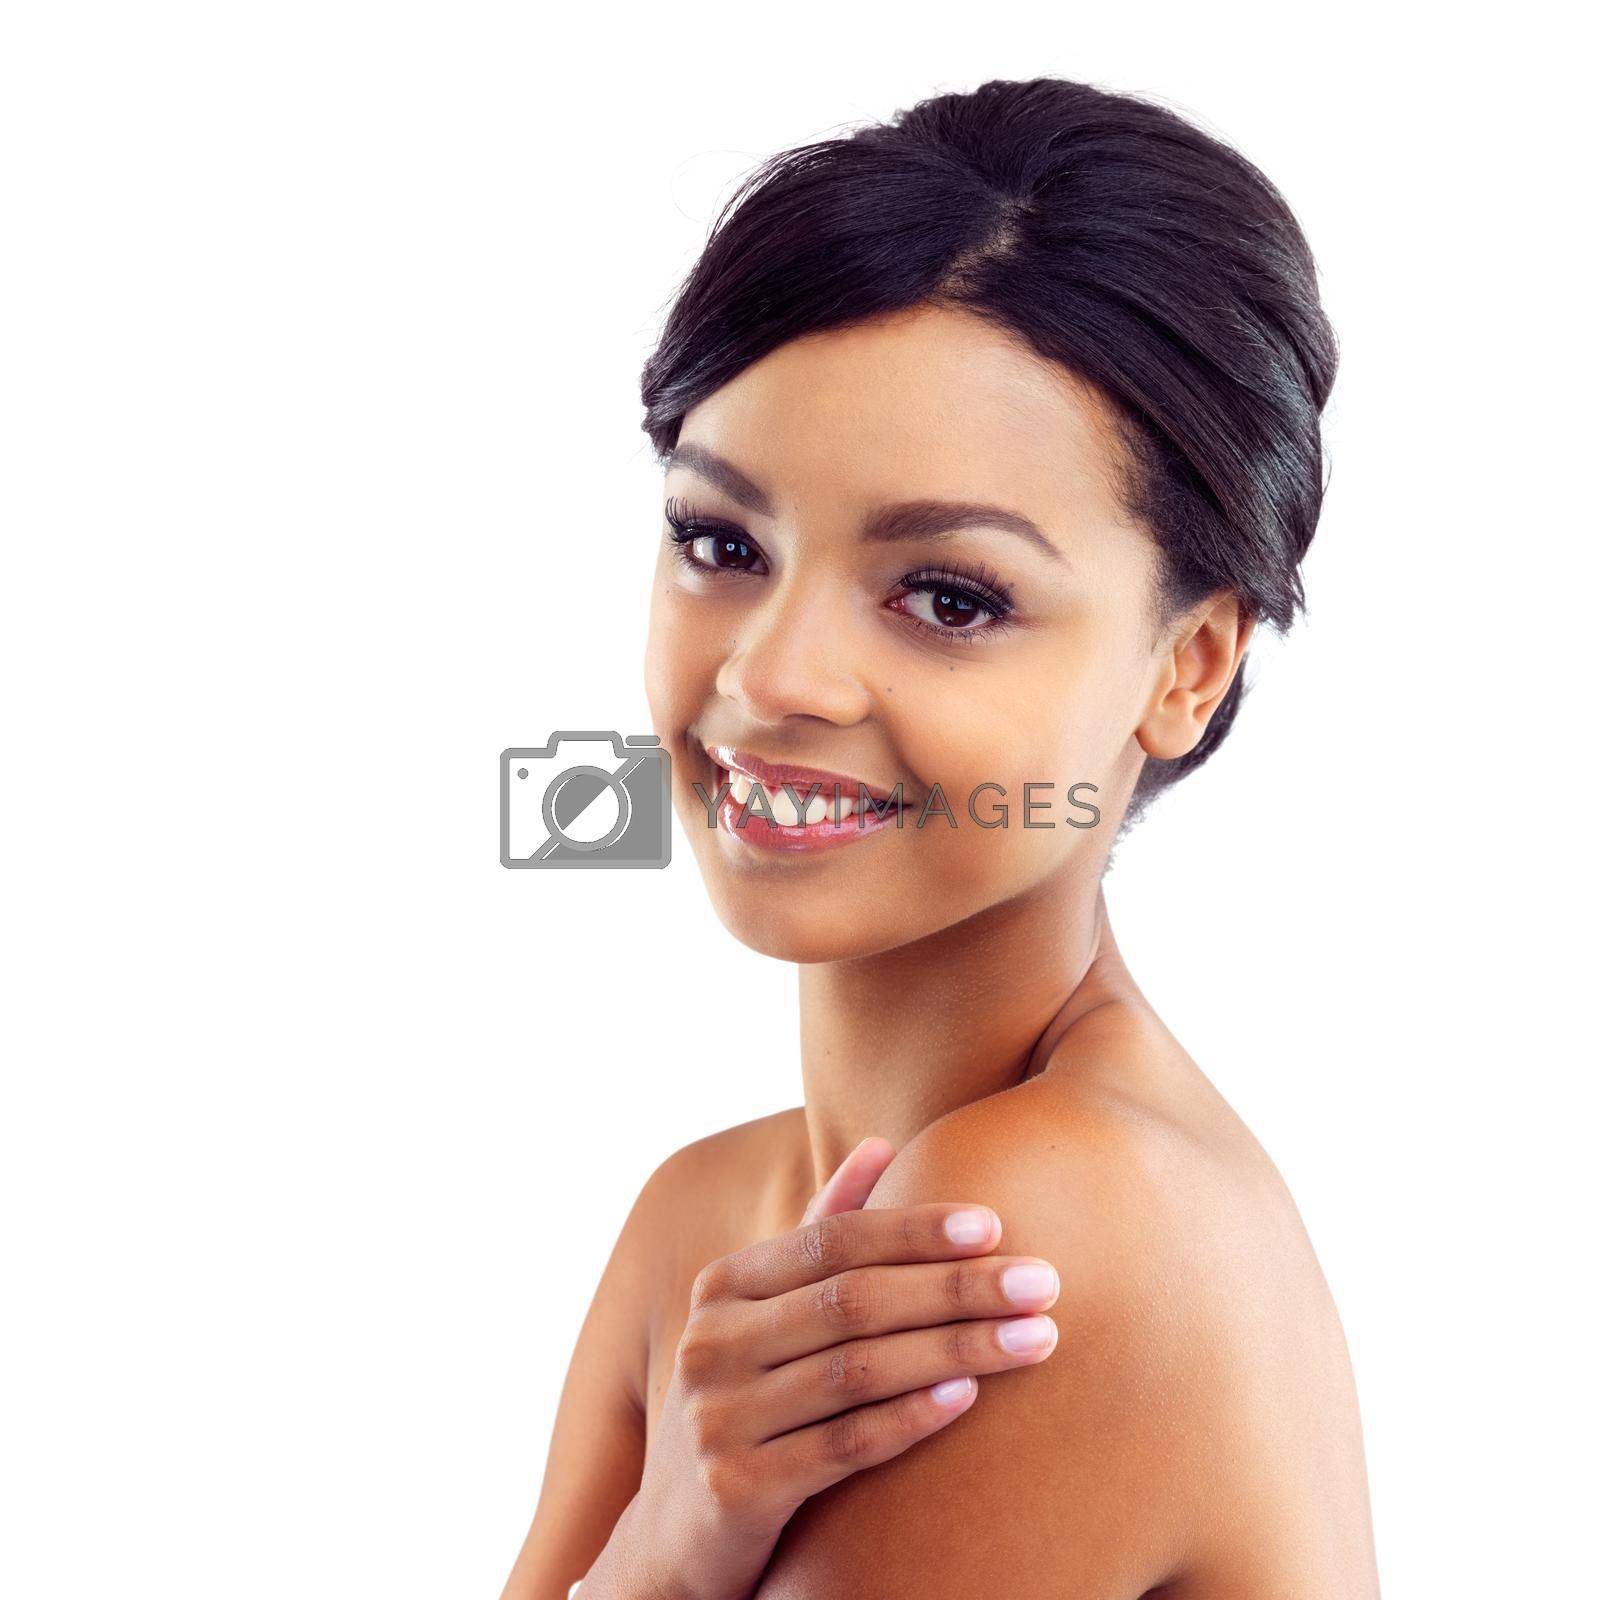 Studio portrait of a young woman with perfect skin posing against a white background.